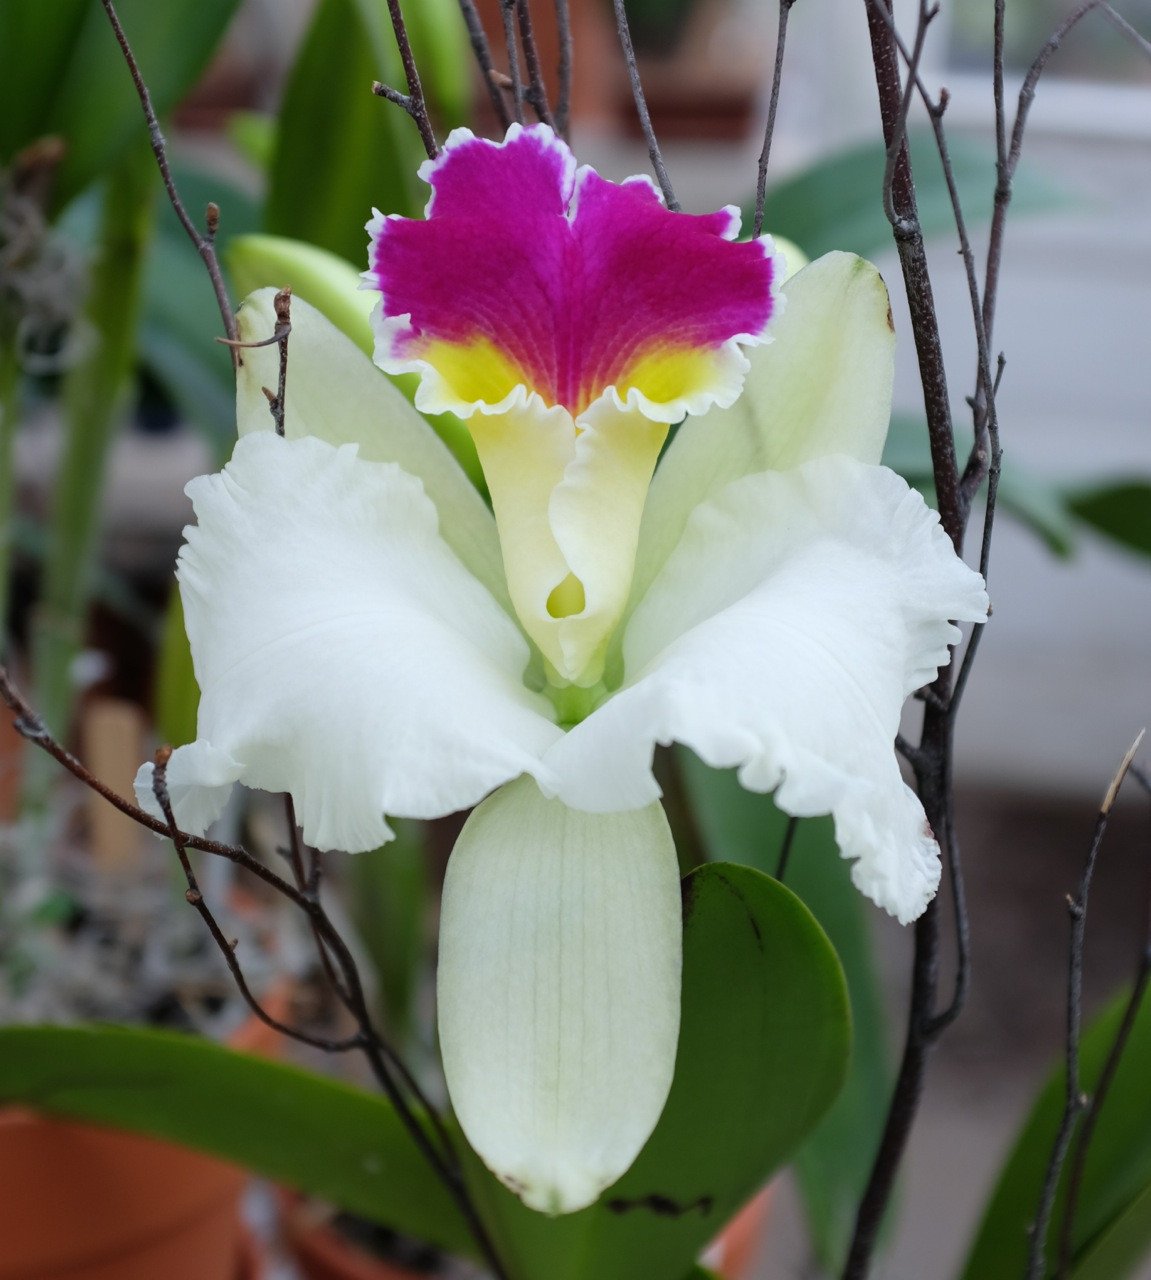 Monthly Orchid plant gift | Send orchid plants in palm beach gardens